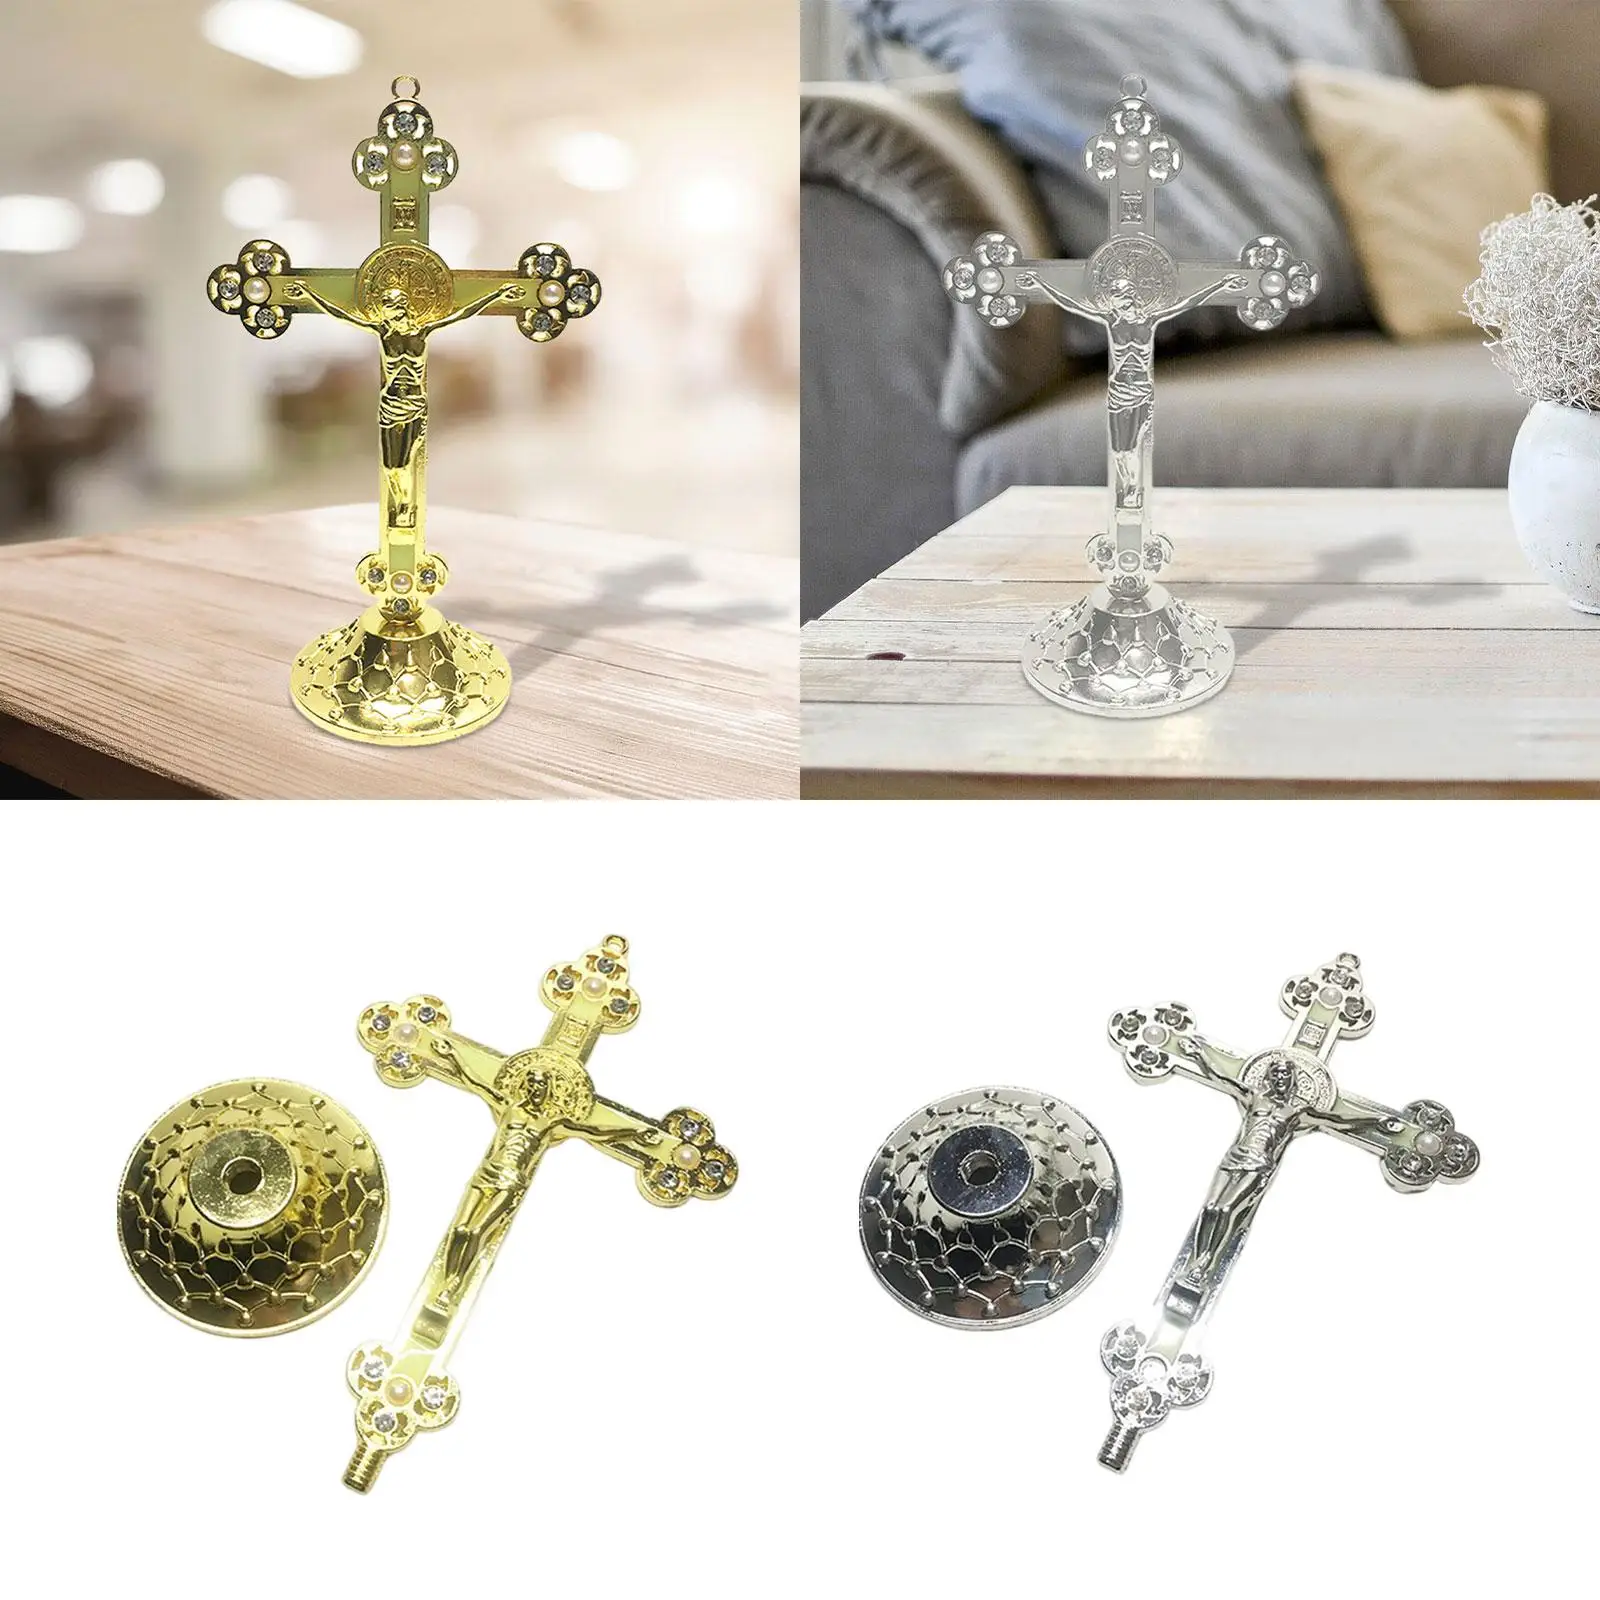 Wall Cross Miniature Collection Religious Ornament Sculpture Crucifix Figurine for Easter Shelf Living Room Christmas Bedroom